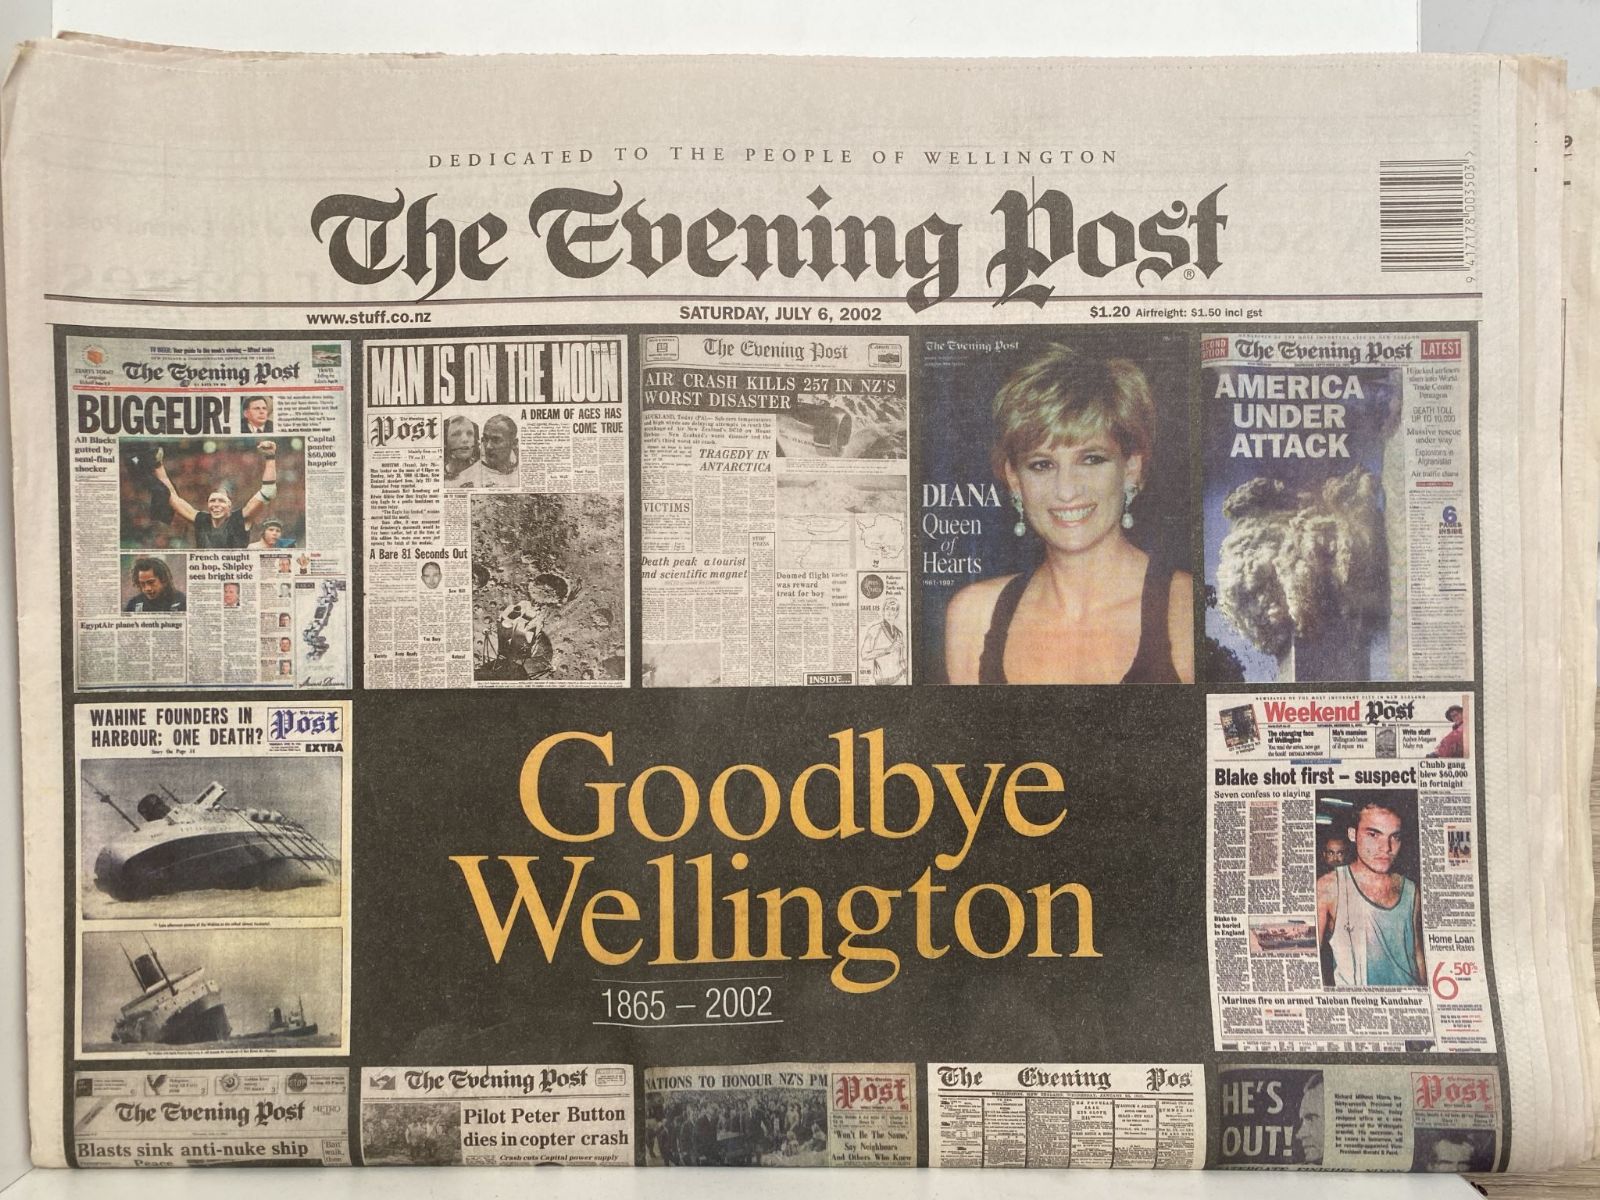 OLD NEWSPAPER: The Evening Post, Wellington - Final edition, 6 July 2002